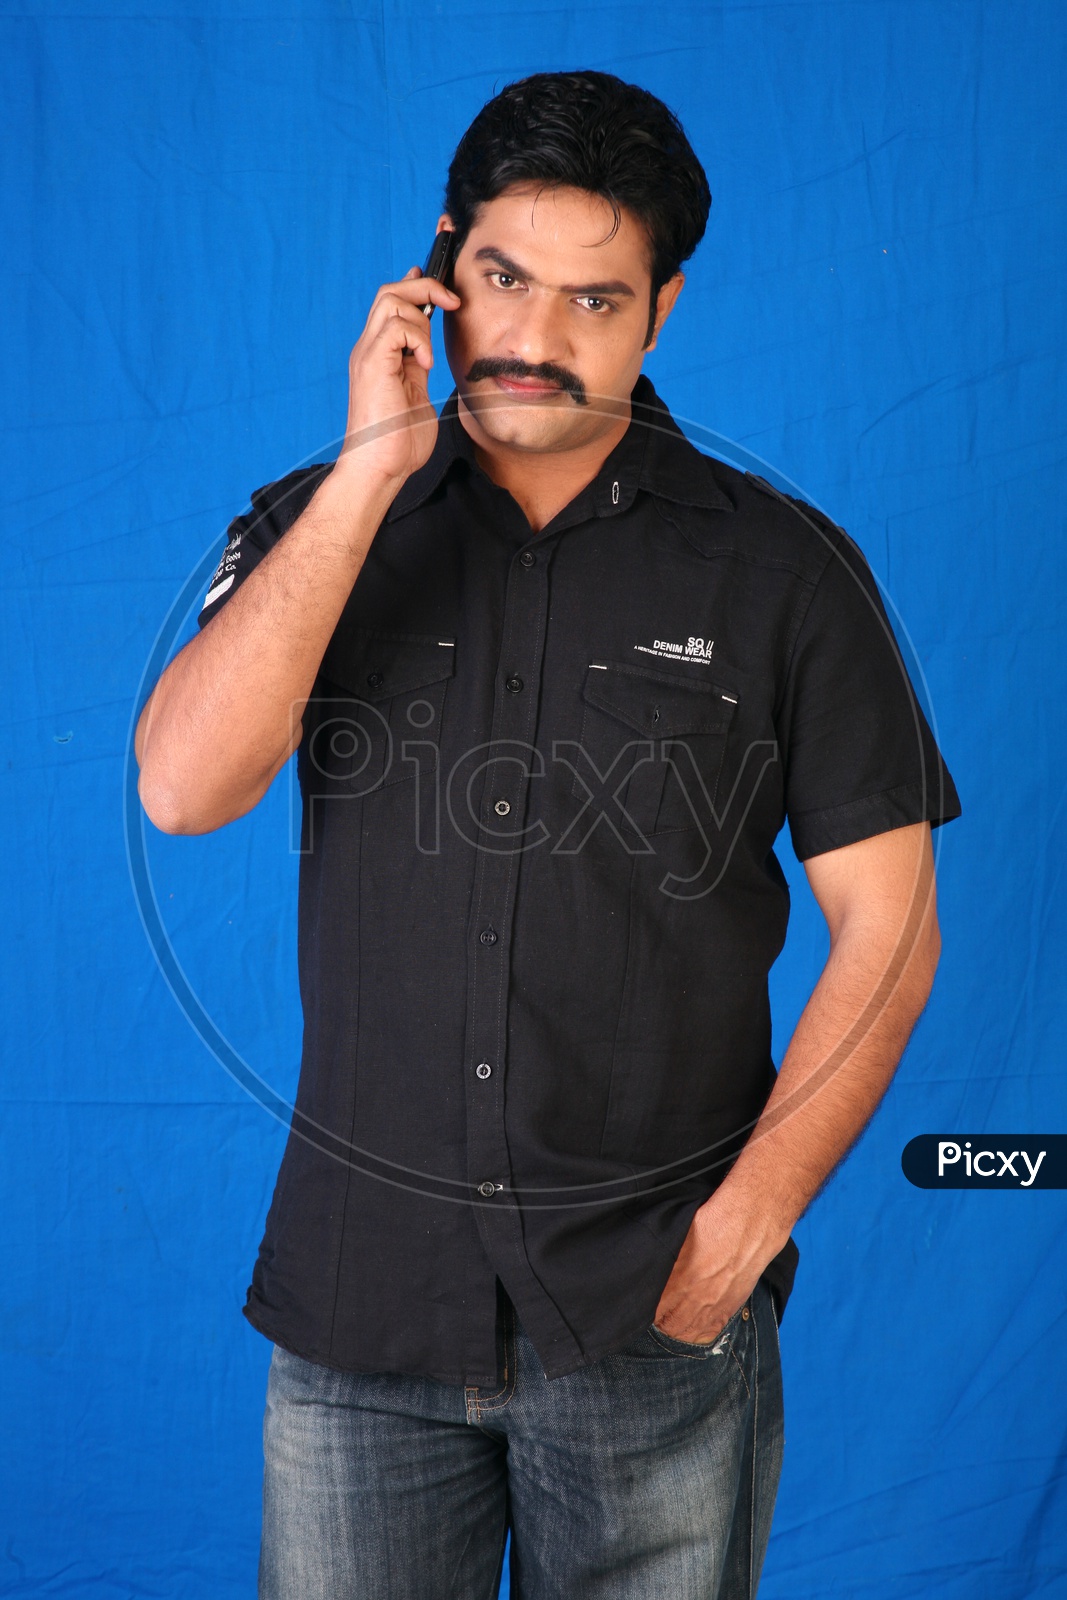 An Indian Man Speaking In a Mobile Phone On an Isolated Blue Background